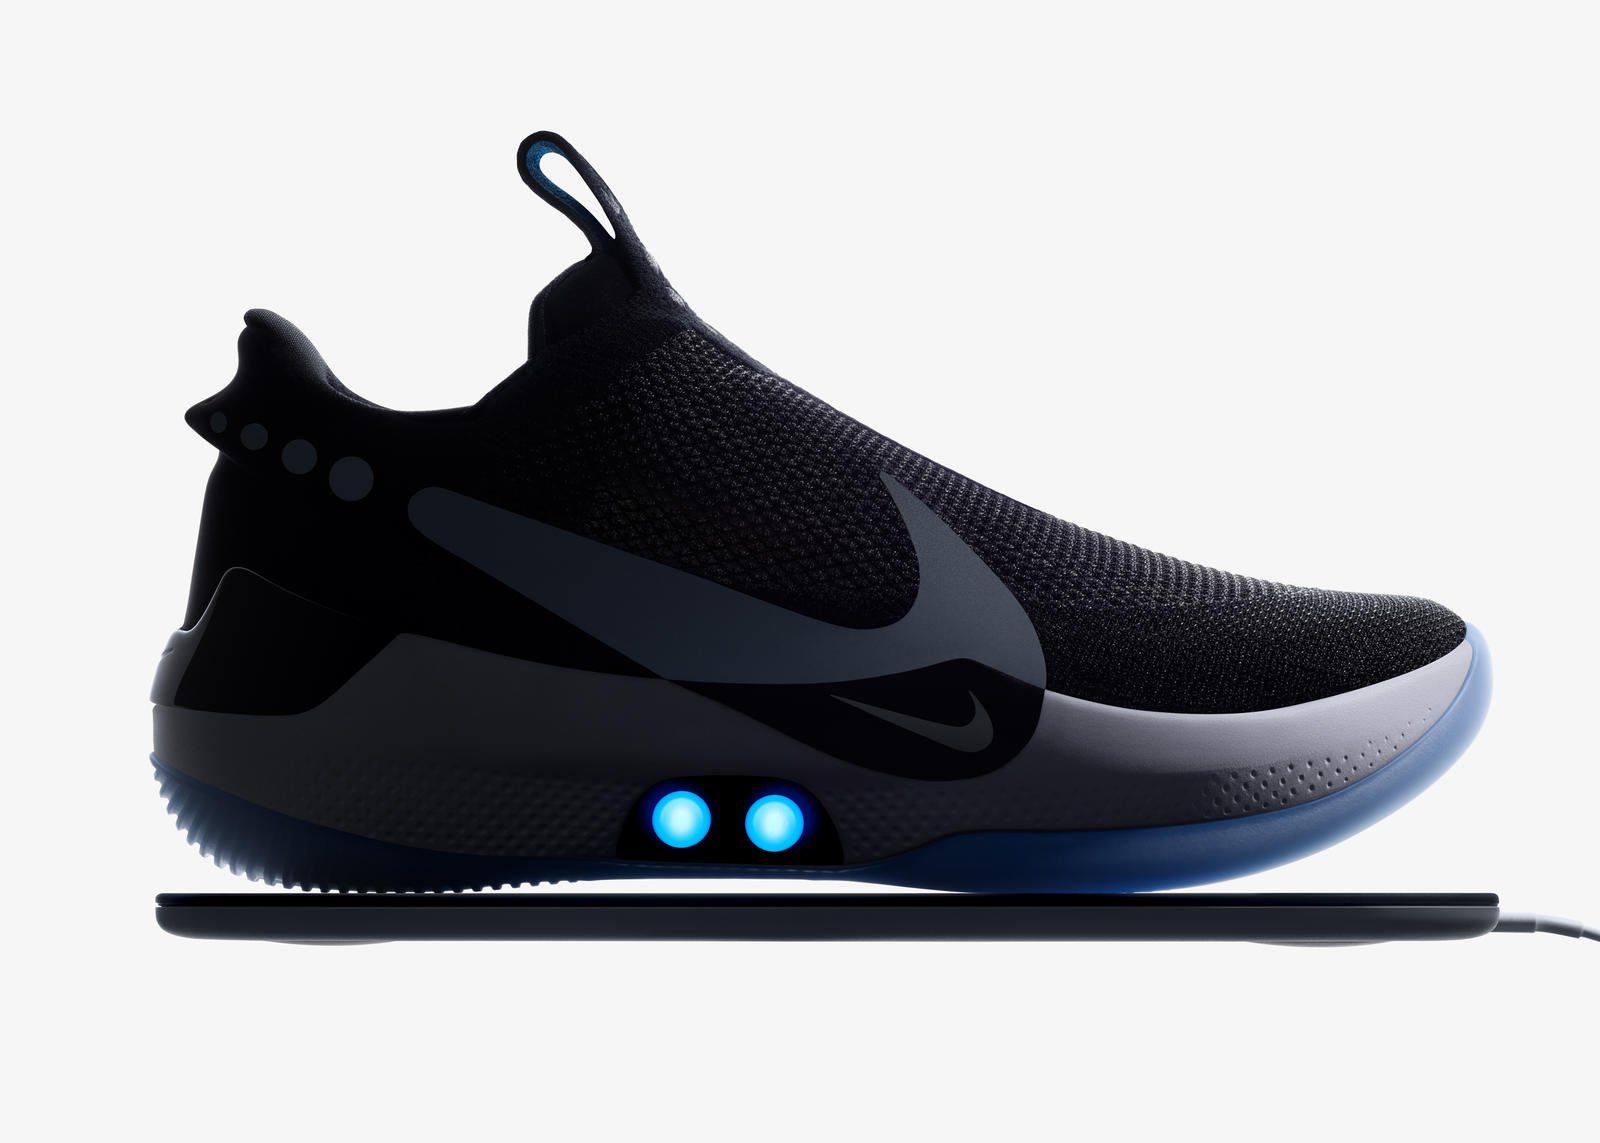 Nike's Expensive Self-Lacing Shoes Adapt BB sneakers